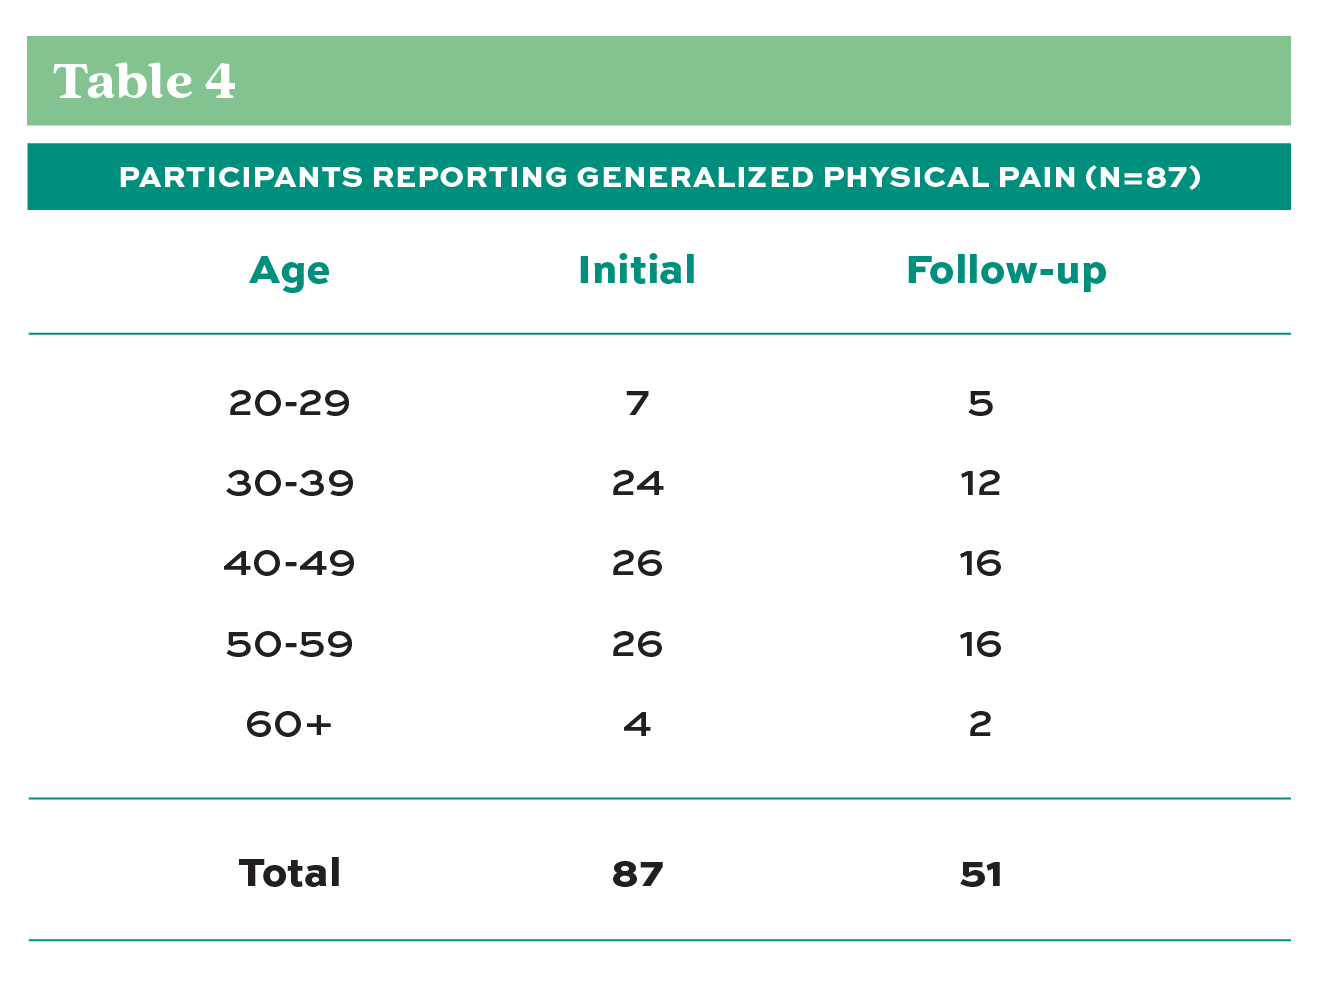 Table 4 - Participants Reporting Generalized Physical Pain